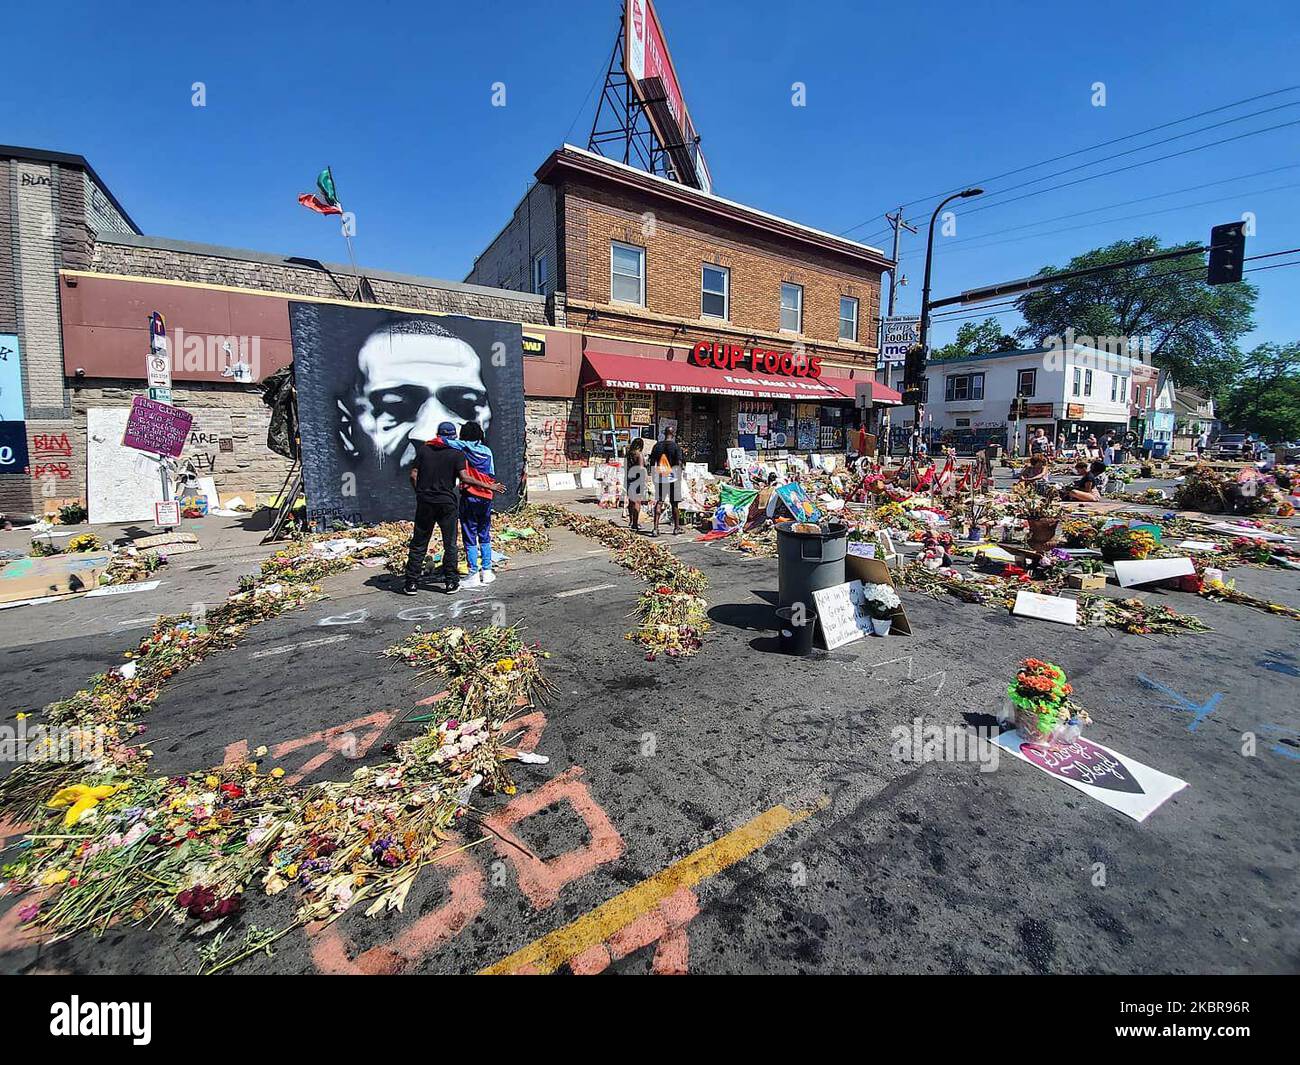 A general view of George Floyd memorial in Minneapolis, United States, on June 16, 2020. Minneapolis officials say memorial could become permanent at intersection where the police murder of George Floyd sparked weeks of global unrest. This comes as the neighborhood market Cup Foods reopened Monday at 38th Street and Chicago Avenue following weeks of protests and mourning outside the store. (Photo by Karla Ann Cote/NurPhoto) Stock Photo